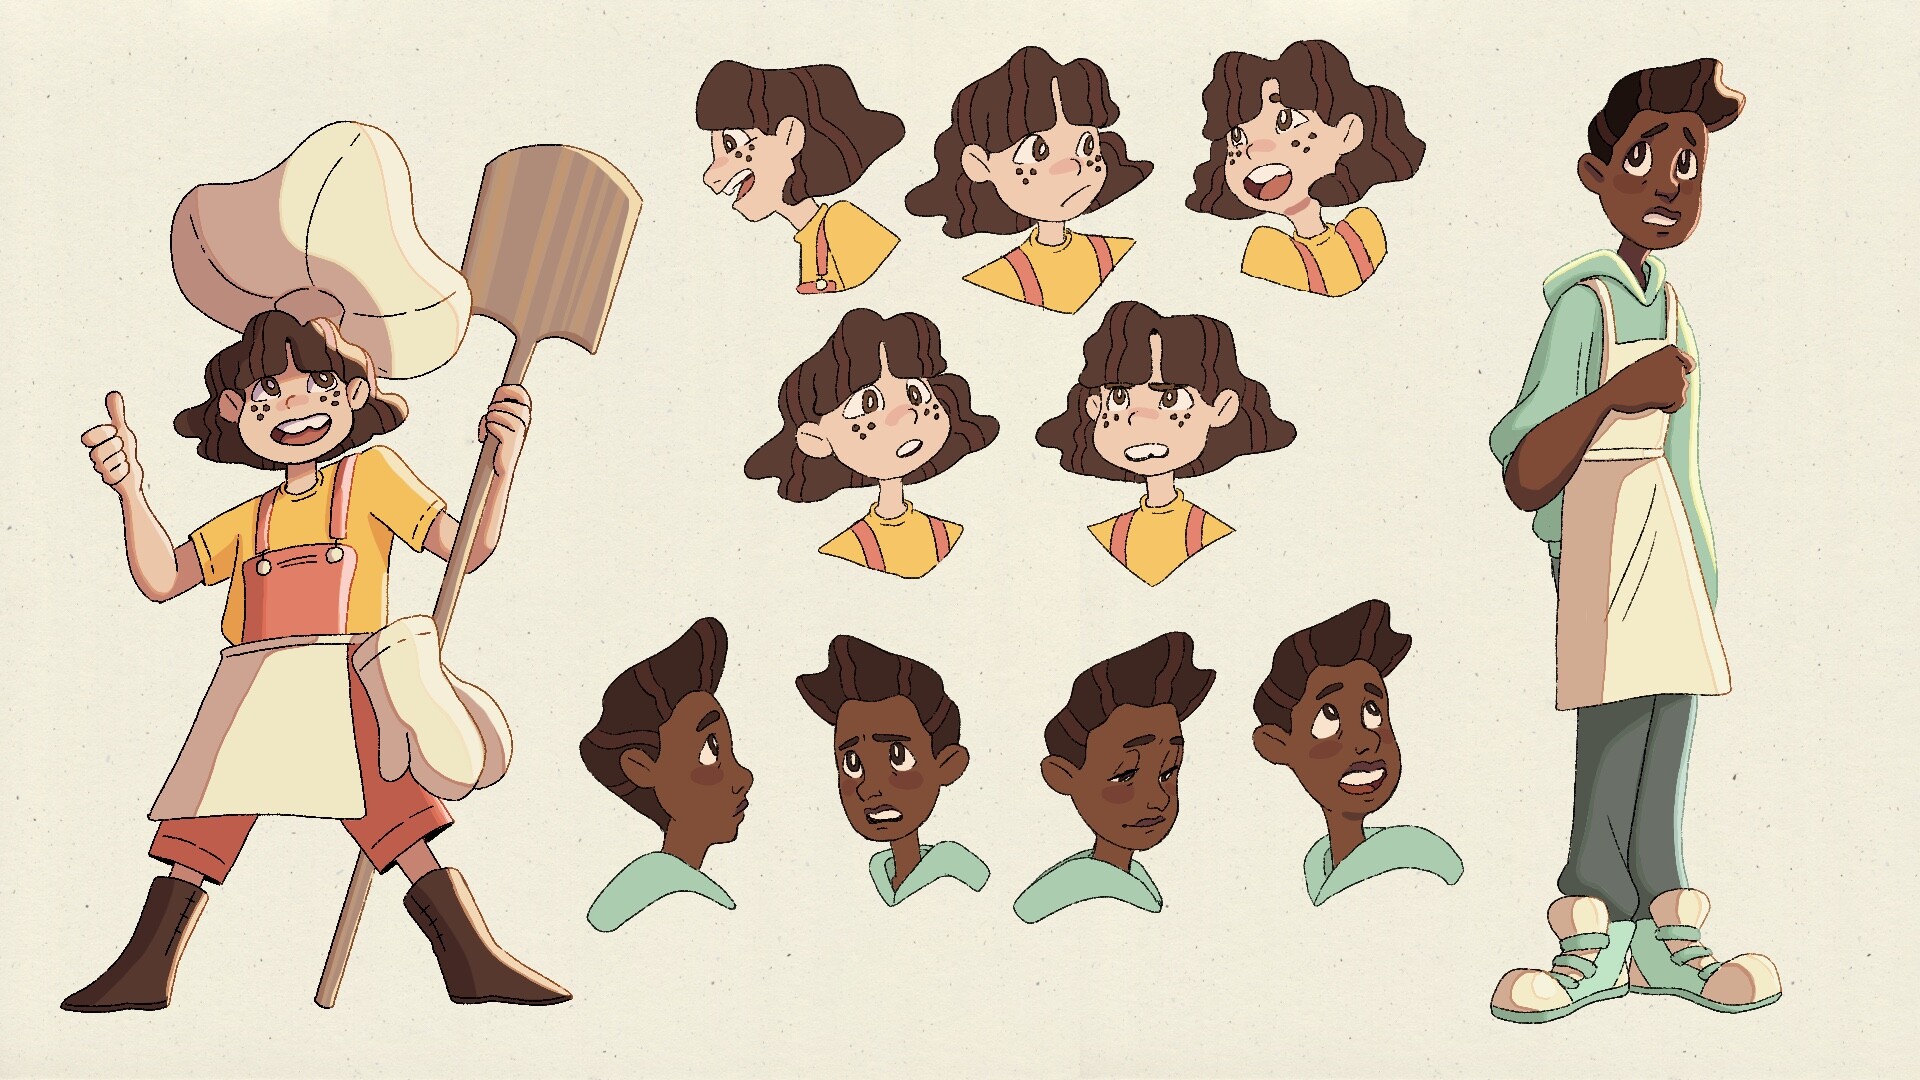 Pin by ｇ ｇ on charactor  B the beginning, Character design animation,  Concept art characters